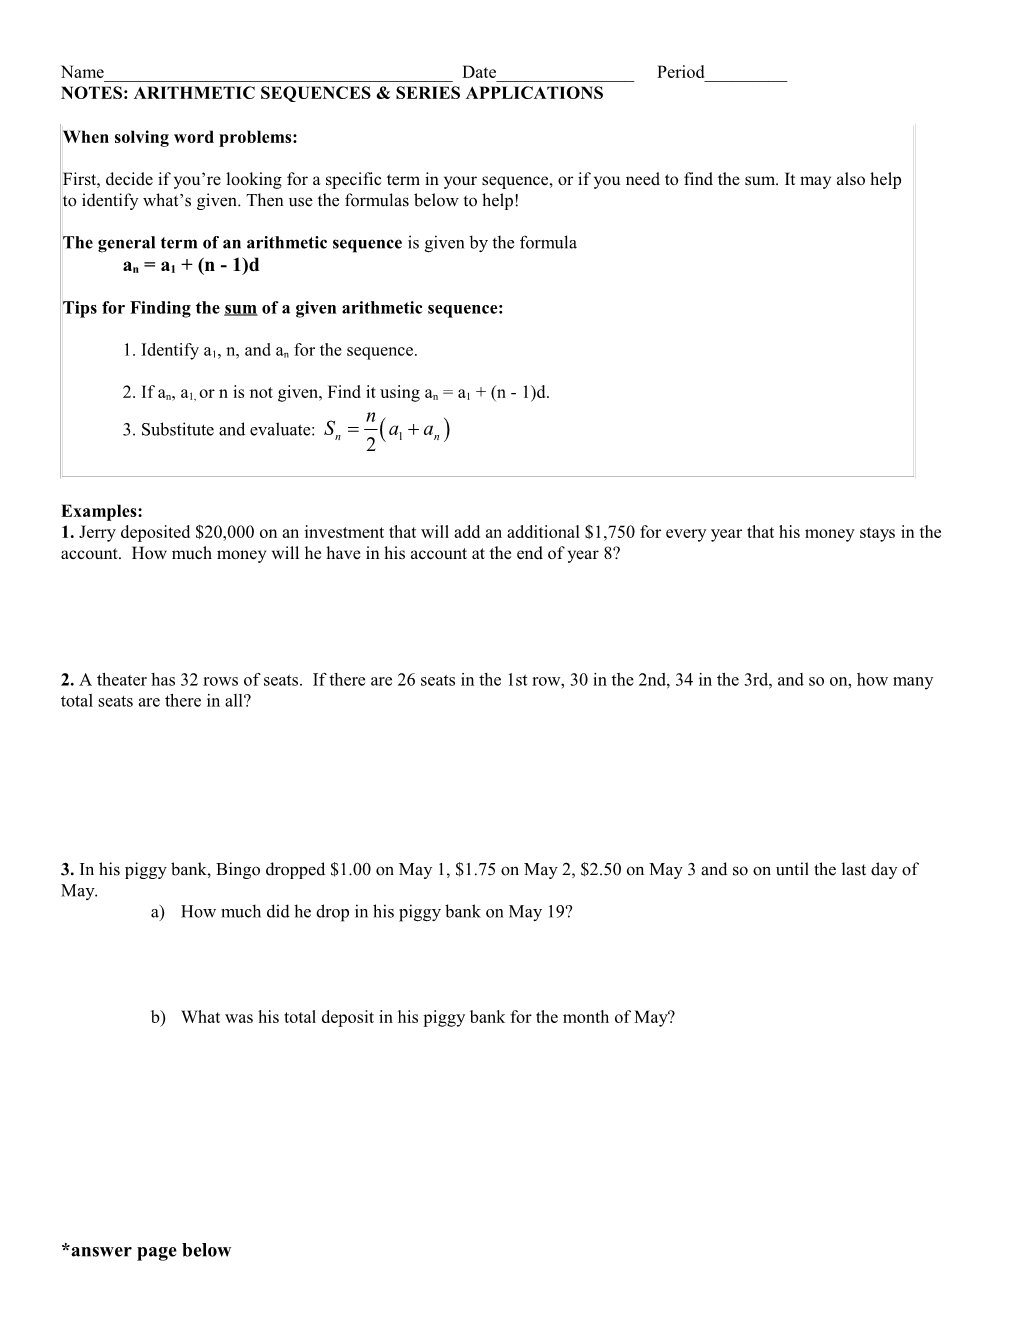 WORKSHEET: Arithmetic Sequence & Series Word Problems